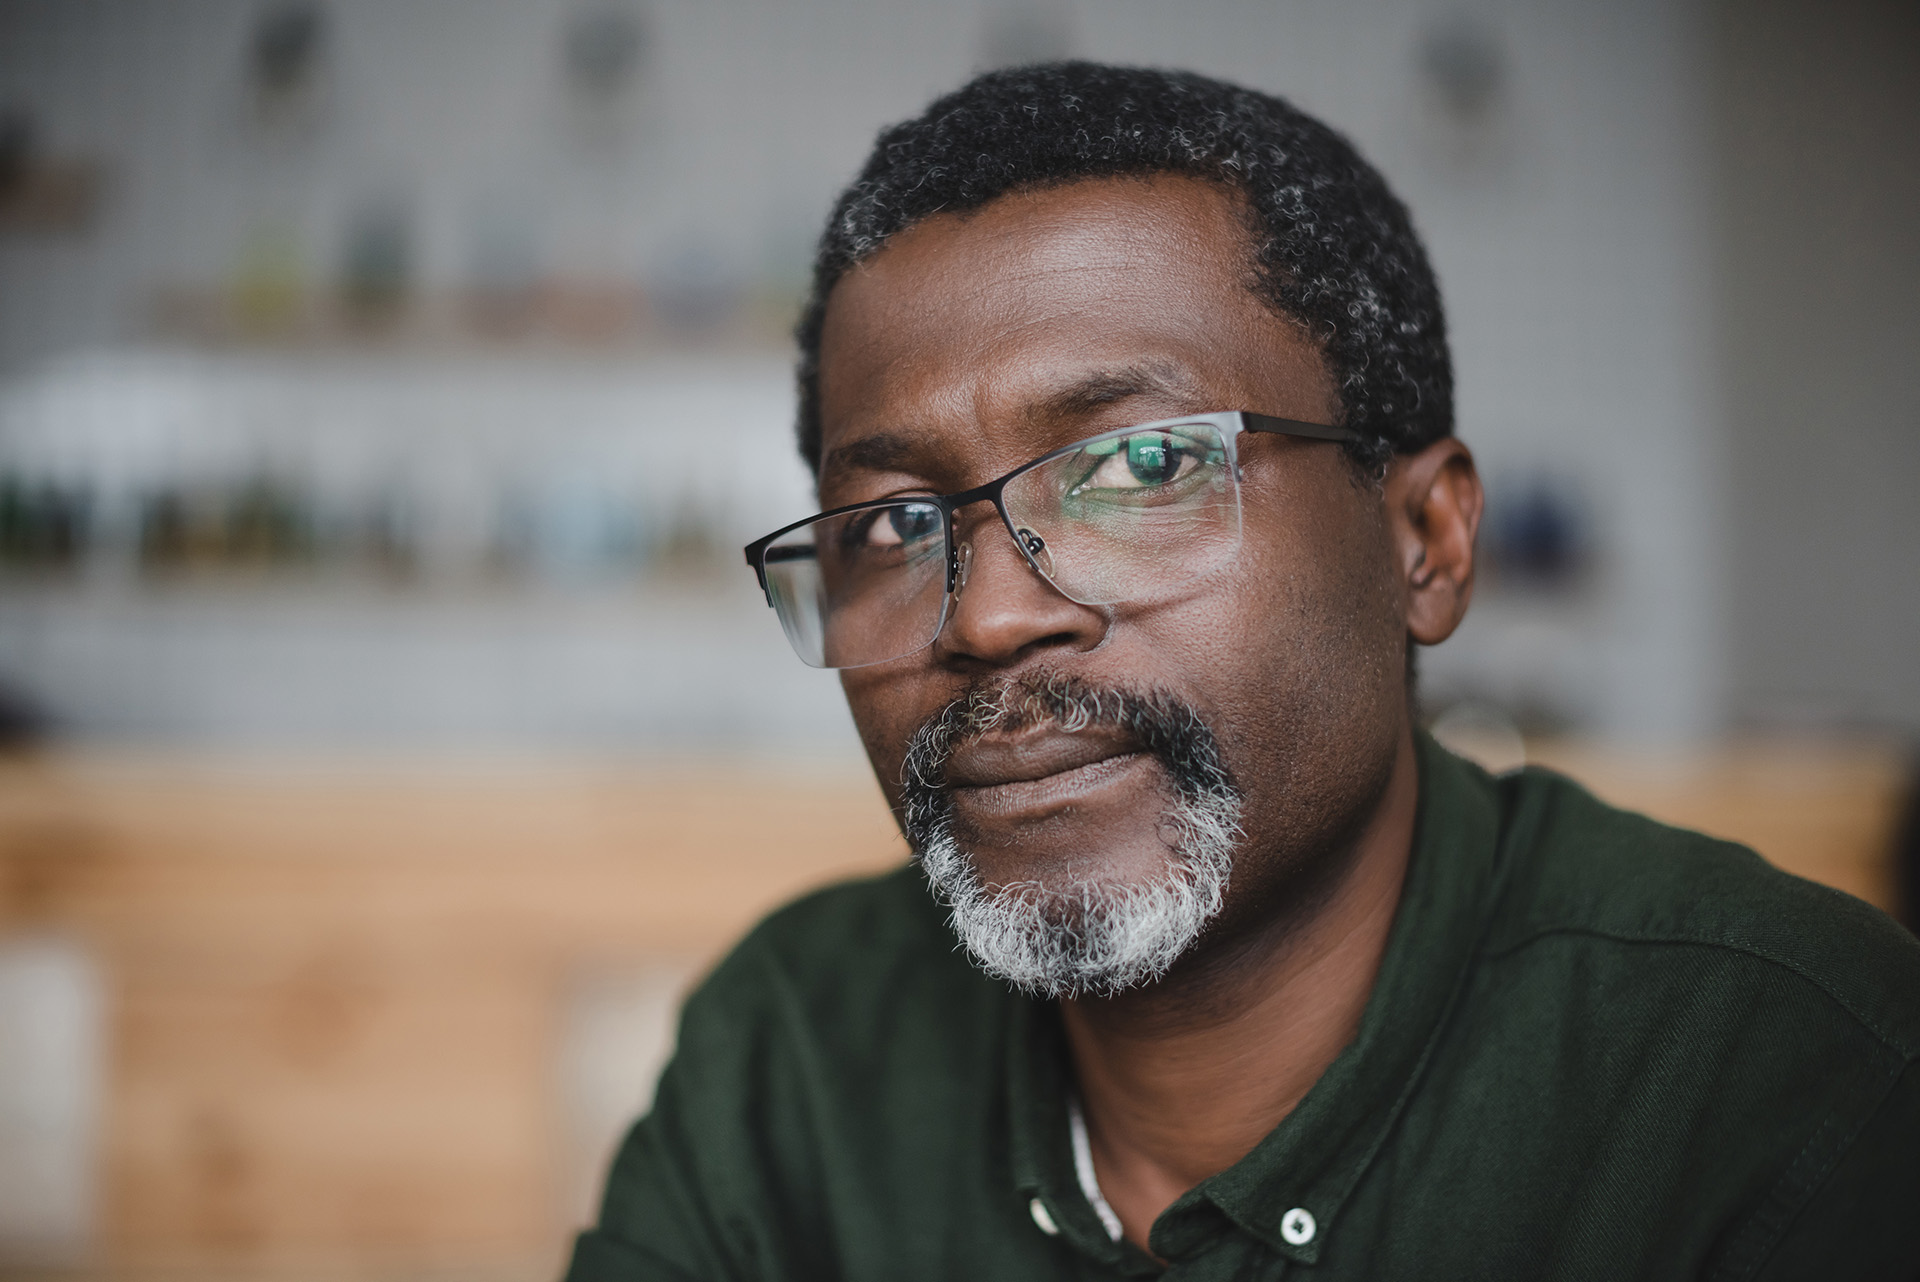 Mature African American man with glasses